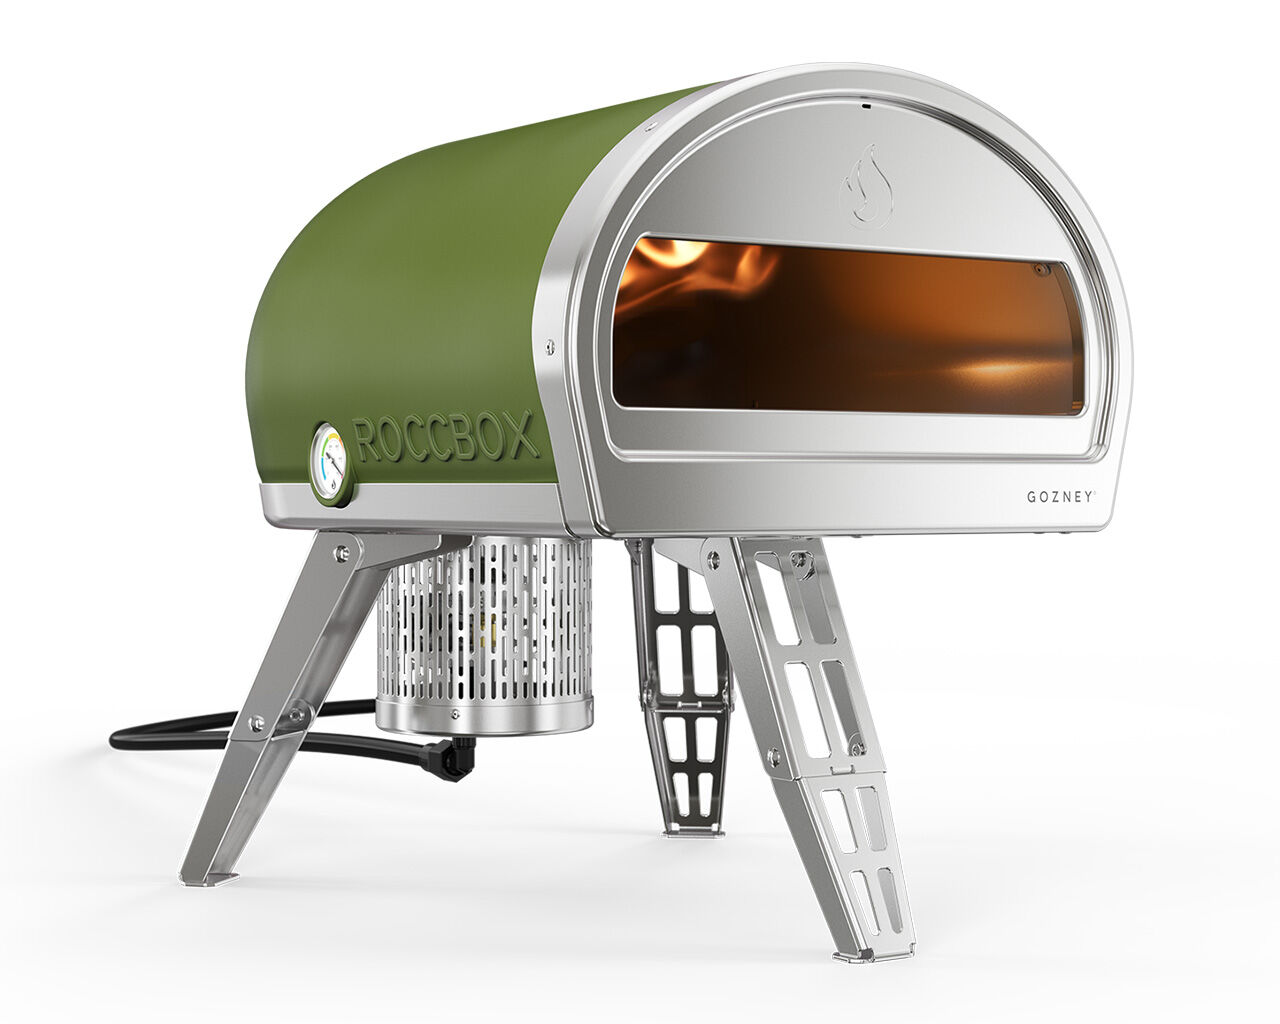 Gozney Roccbox Portable Pizza Oven - Olive, Olive, hi-res image number null